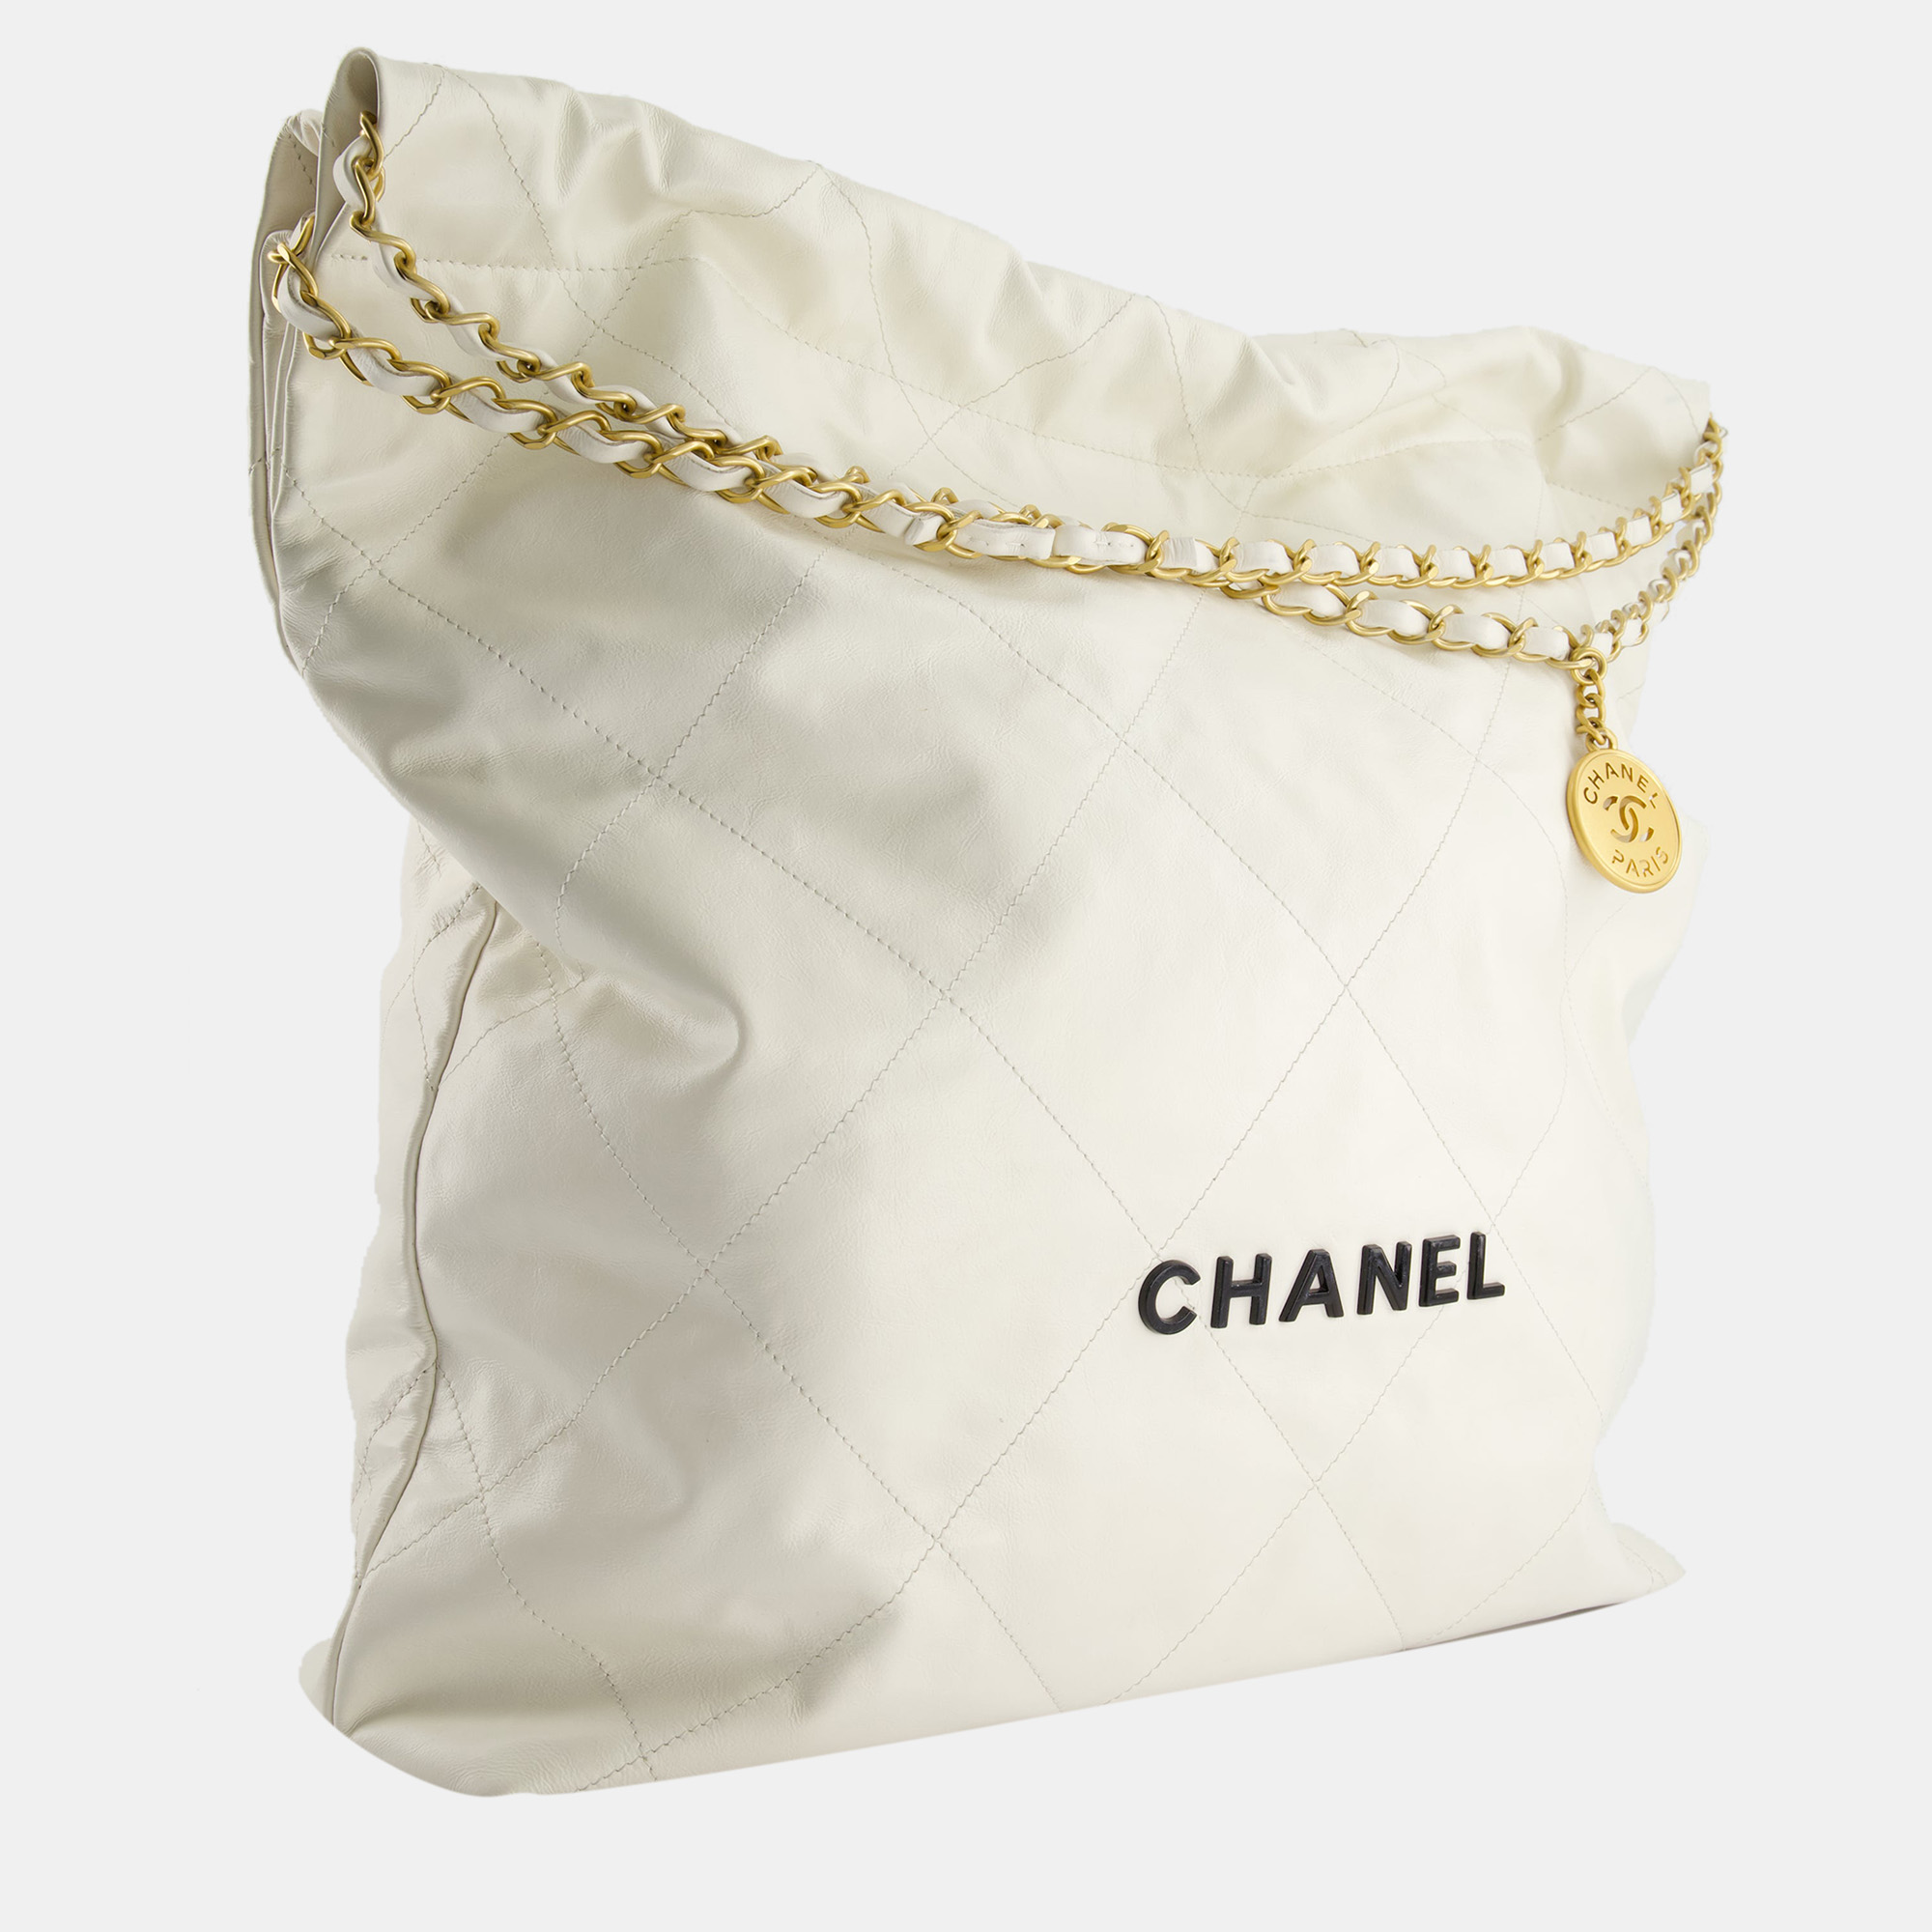 

Chanel 22 Bag in White Aged Calfskin with Brushed Gold Hardware